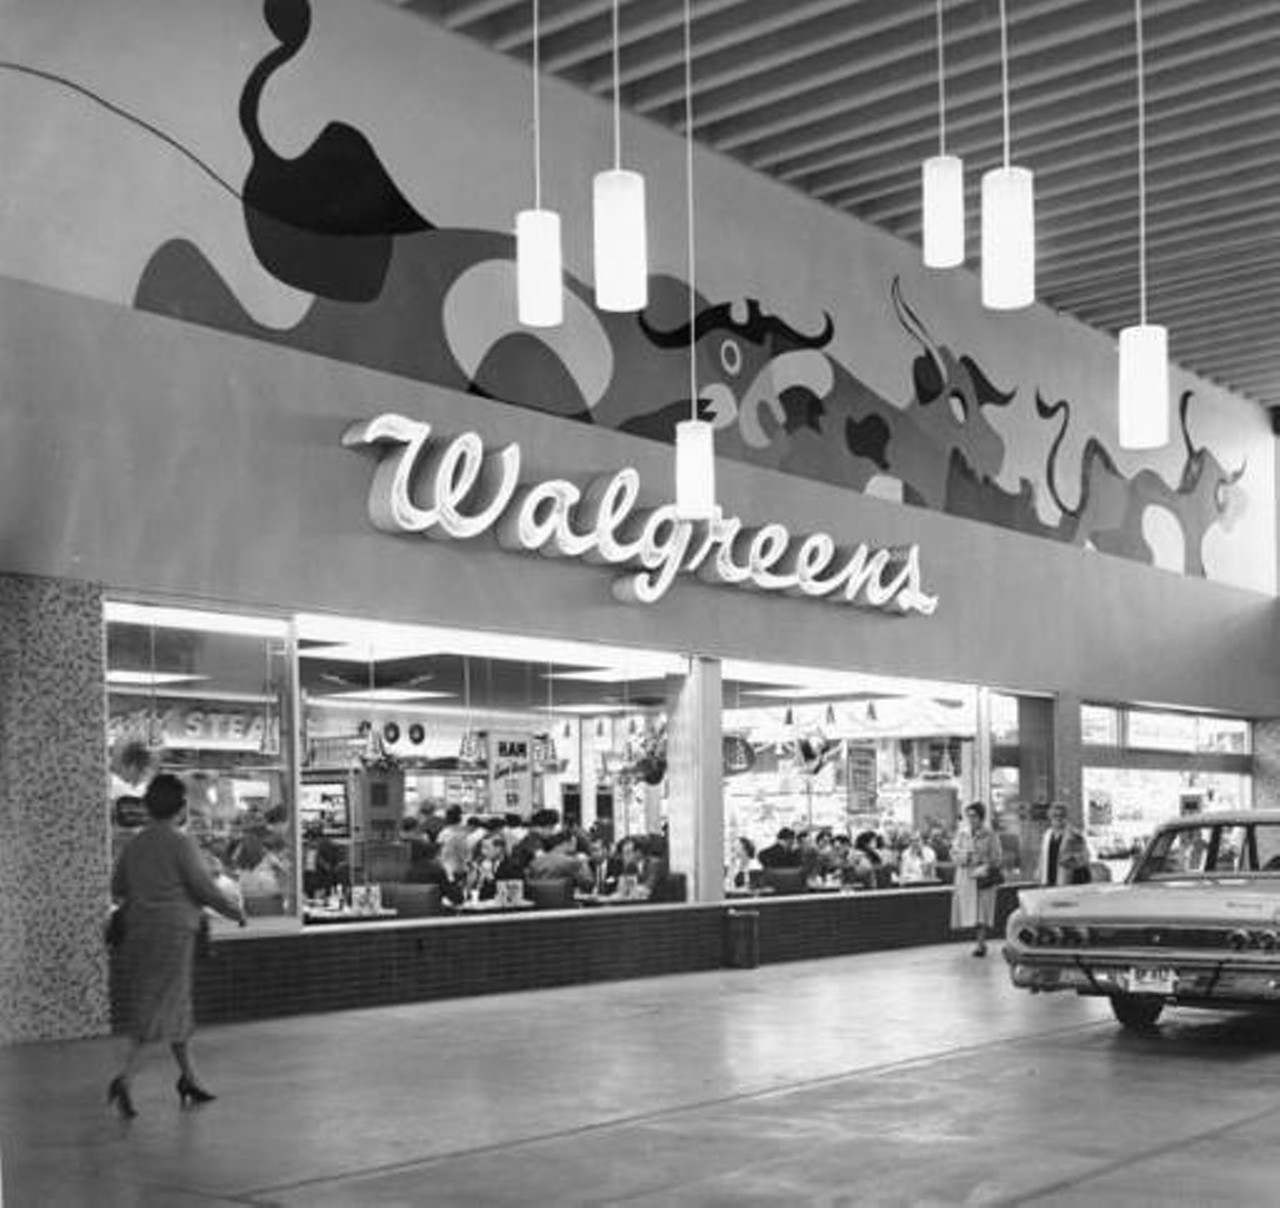 Walgreens, a 1961 Mercury Monterey, and North Star Mall, circa 1960s
Did you know there used to be a Walgreens in North Star Mall? There was.
Photo via Zintgraff Studio Photo Collection